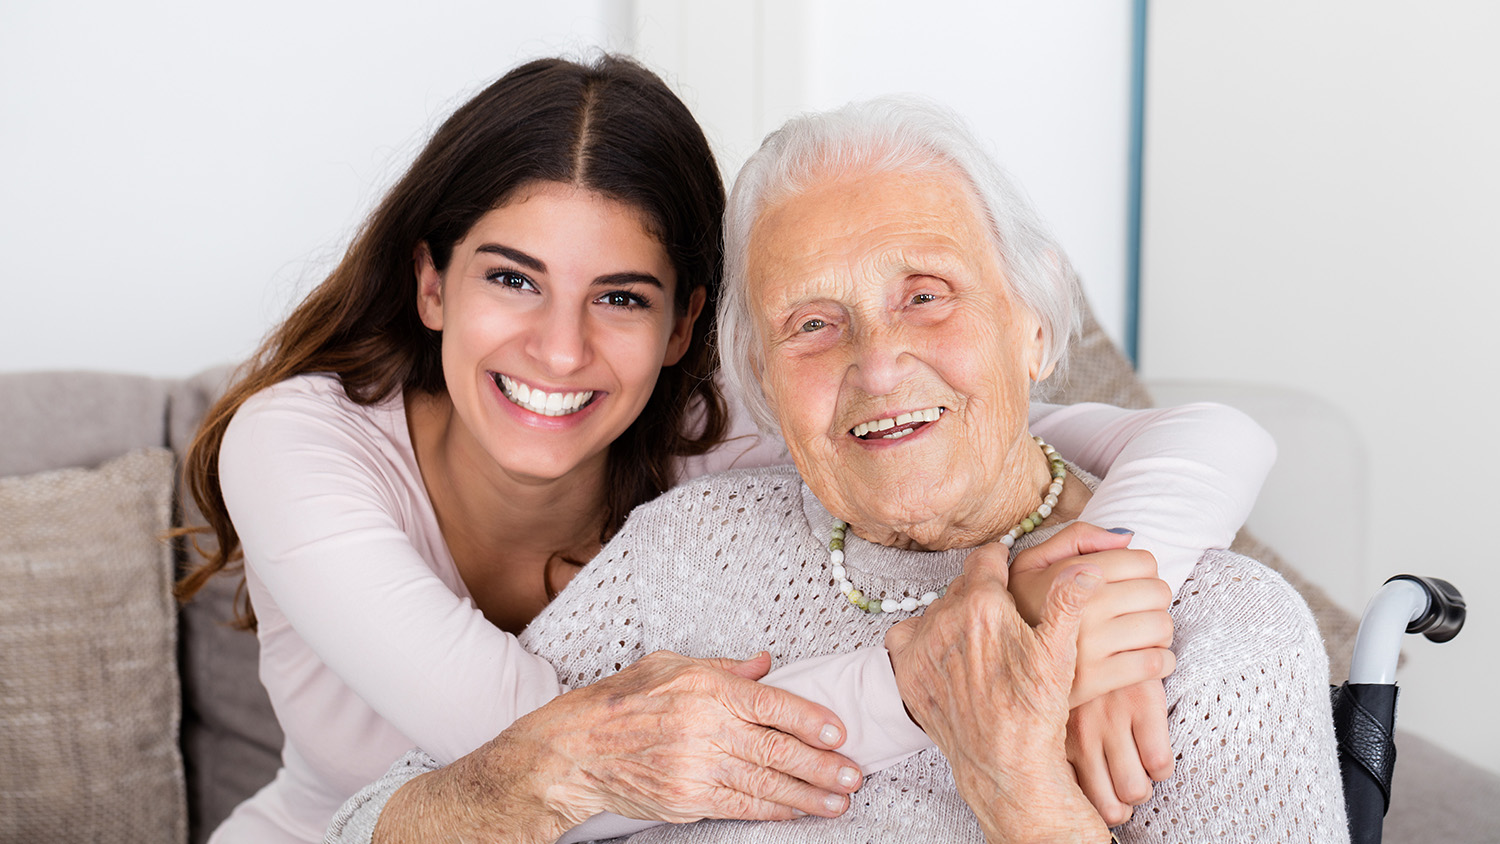 Carer Support Plan cover image of two women embracing